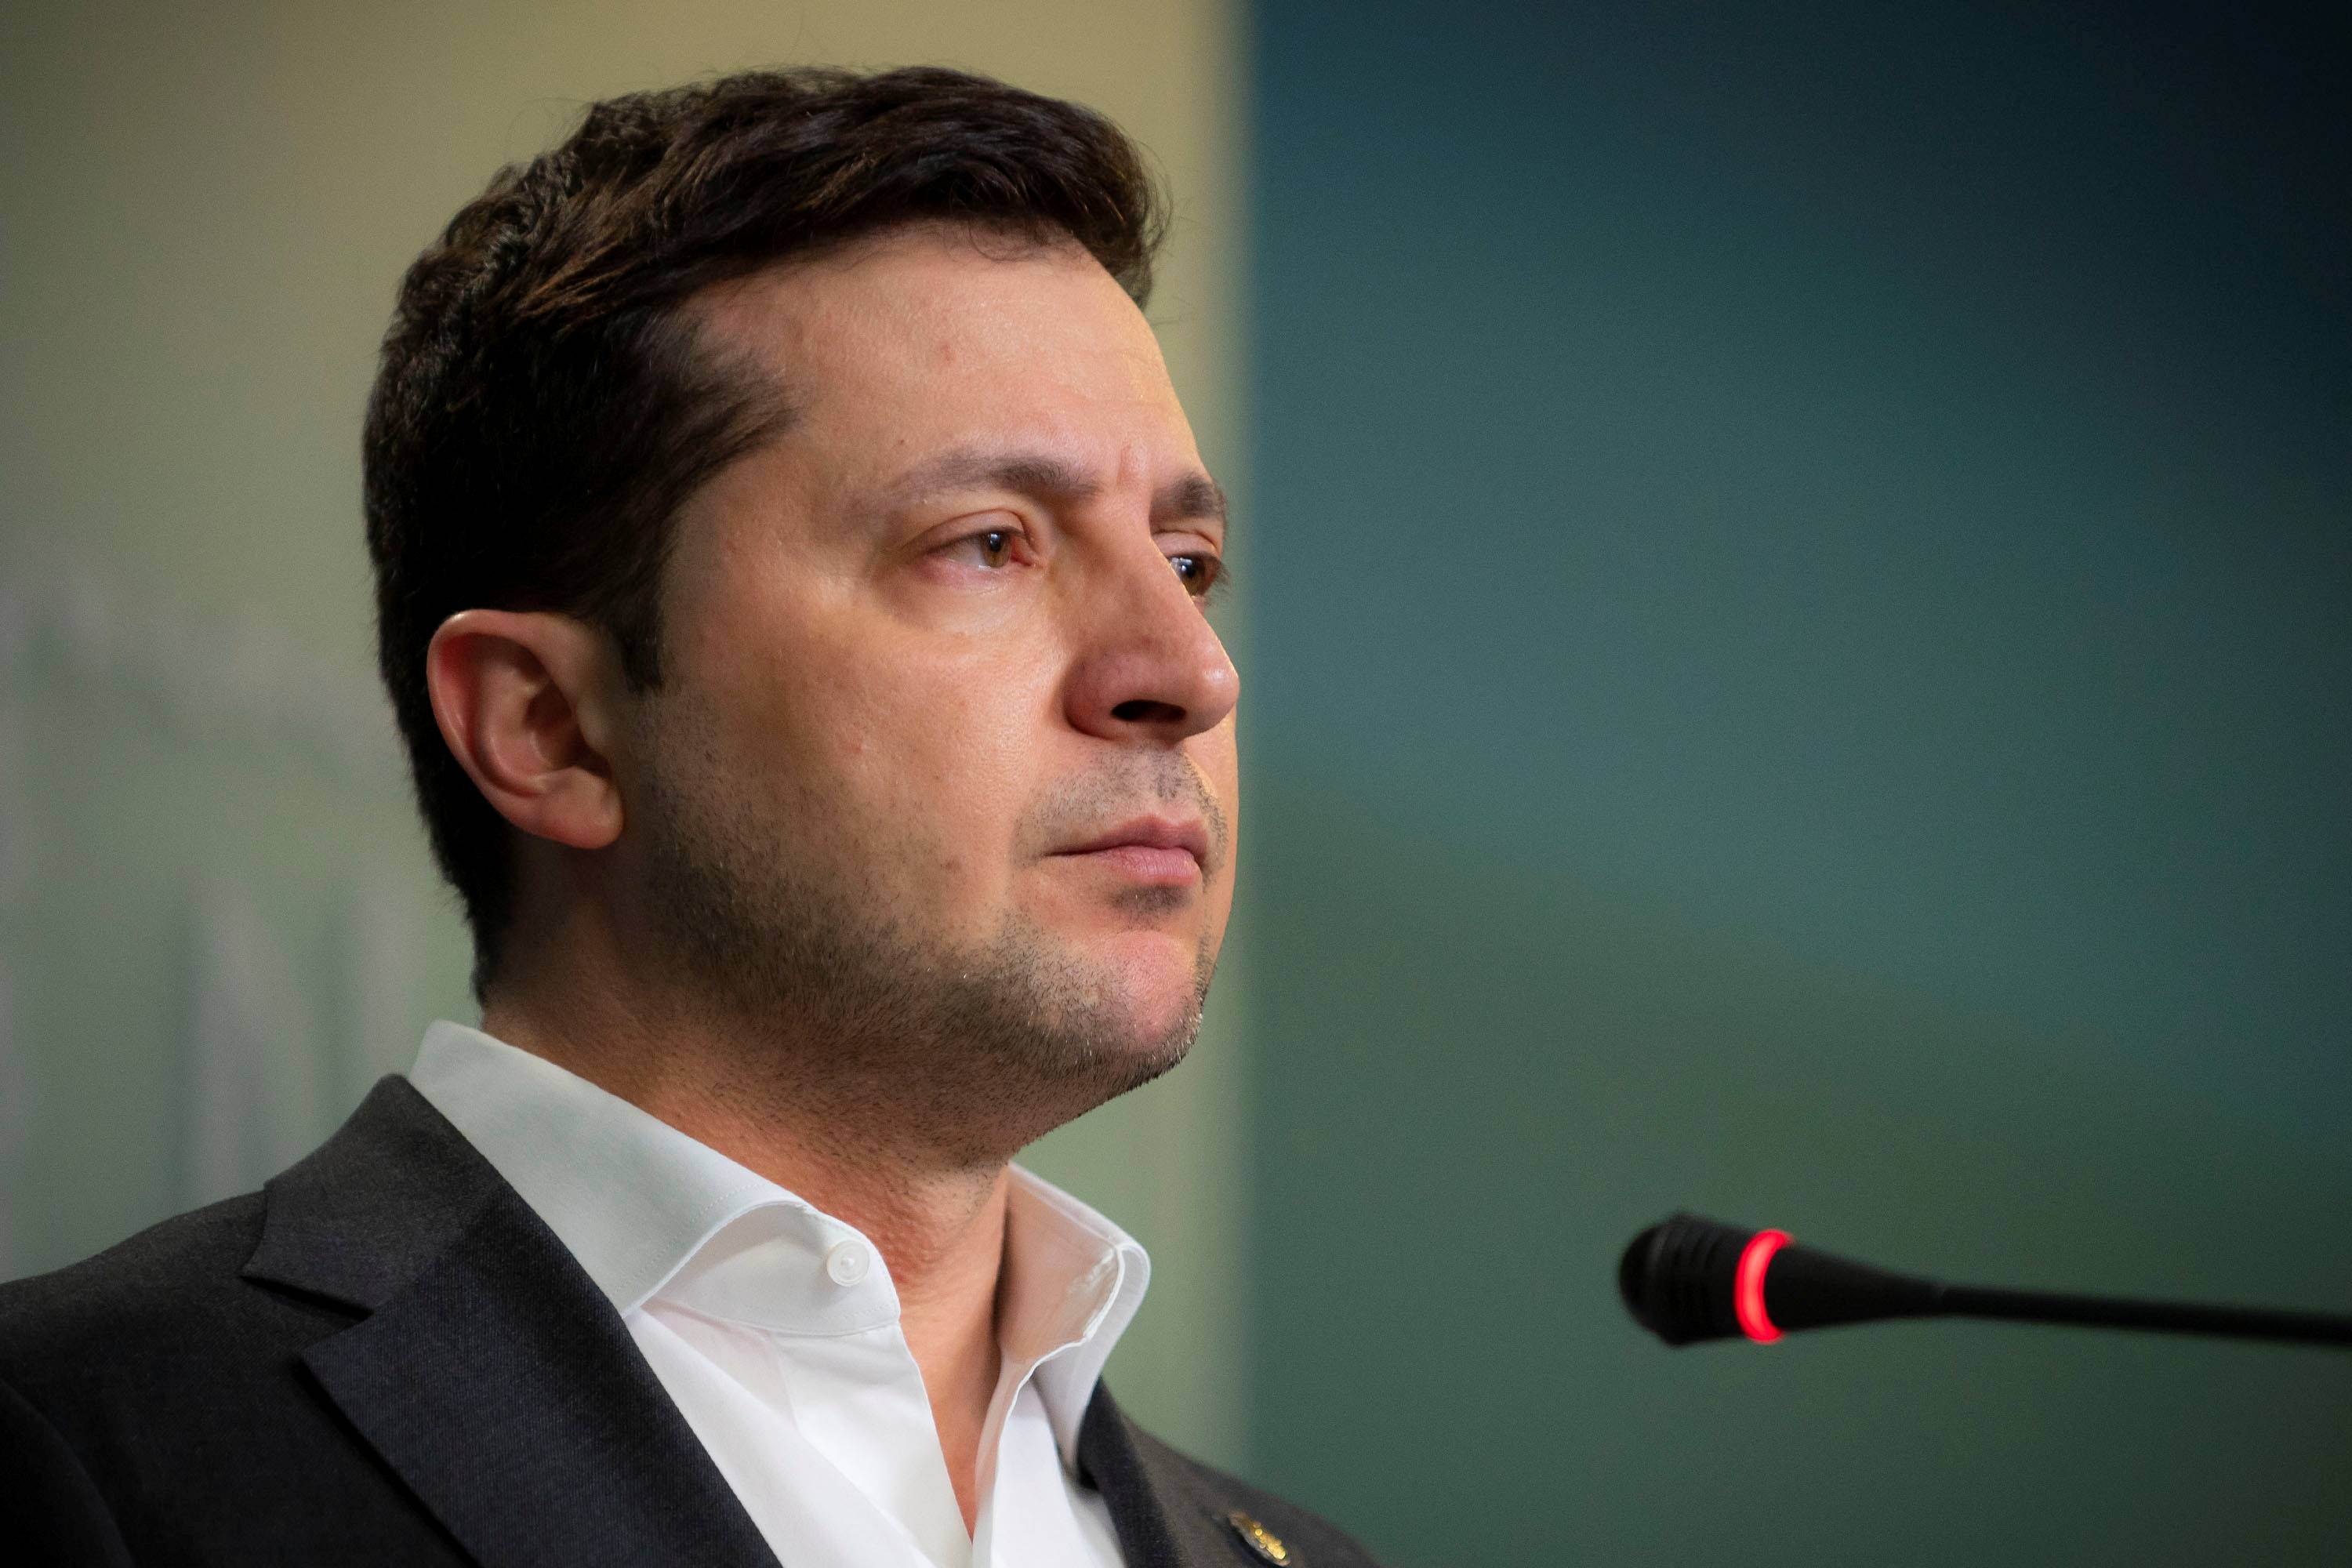 Russia adds Zelenskyy to its wanted list